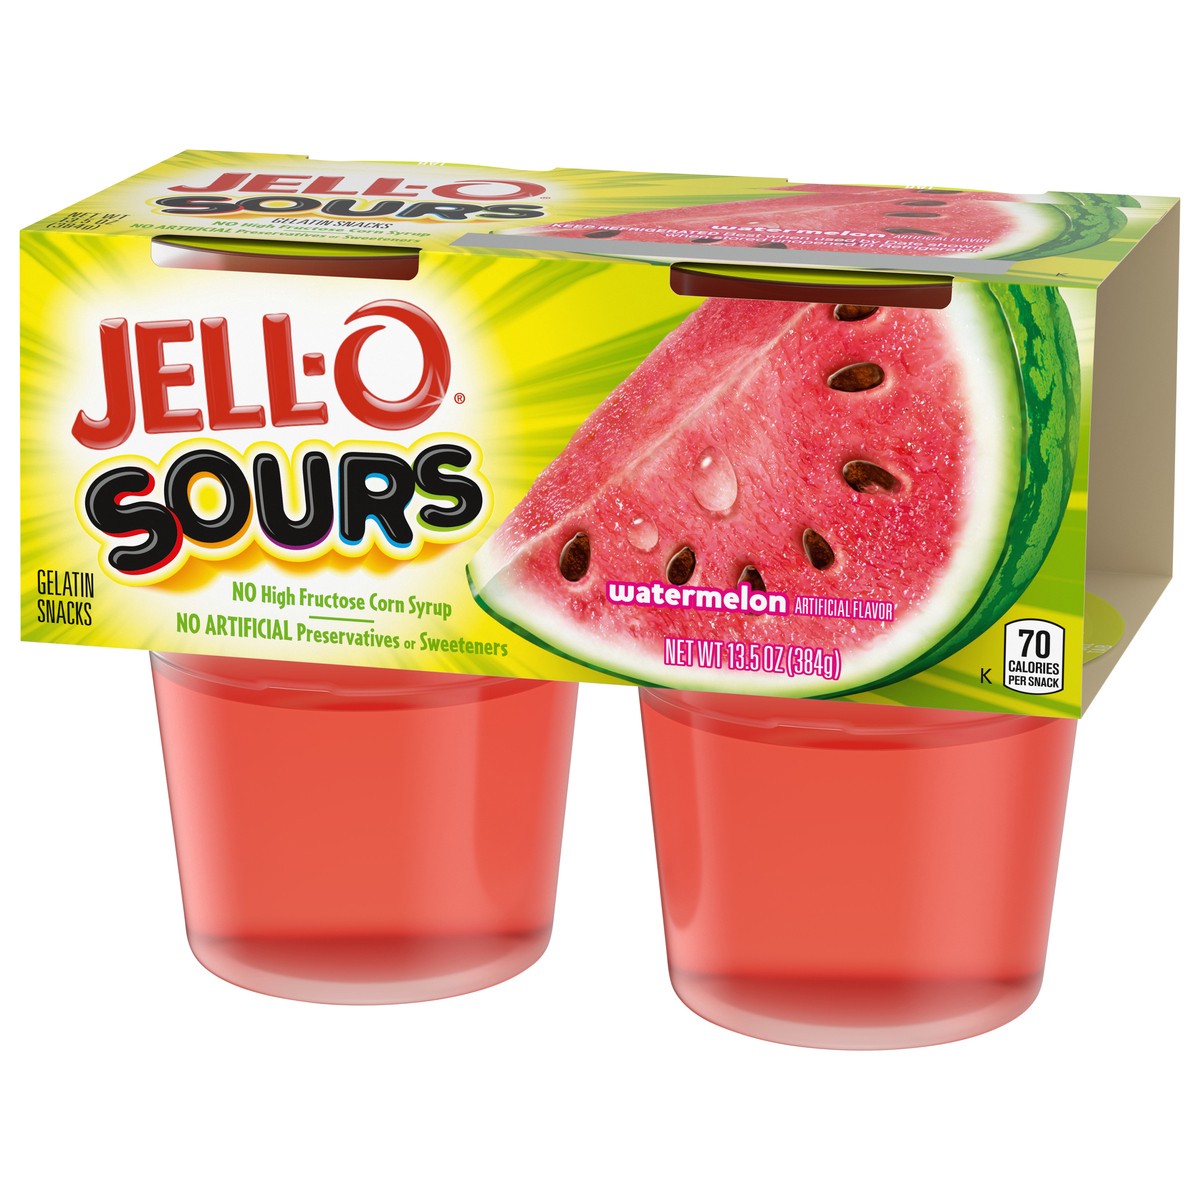 slide 9 of 9, Jell-O Sours Watermelon Ready-to-Eat Jello Cups Gelatin Snack, 4 ct Cups, 4 ct